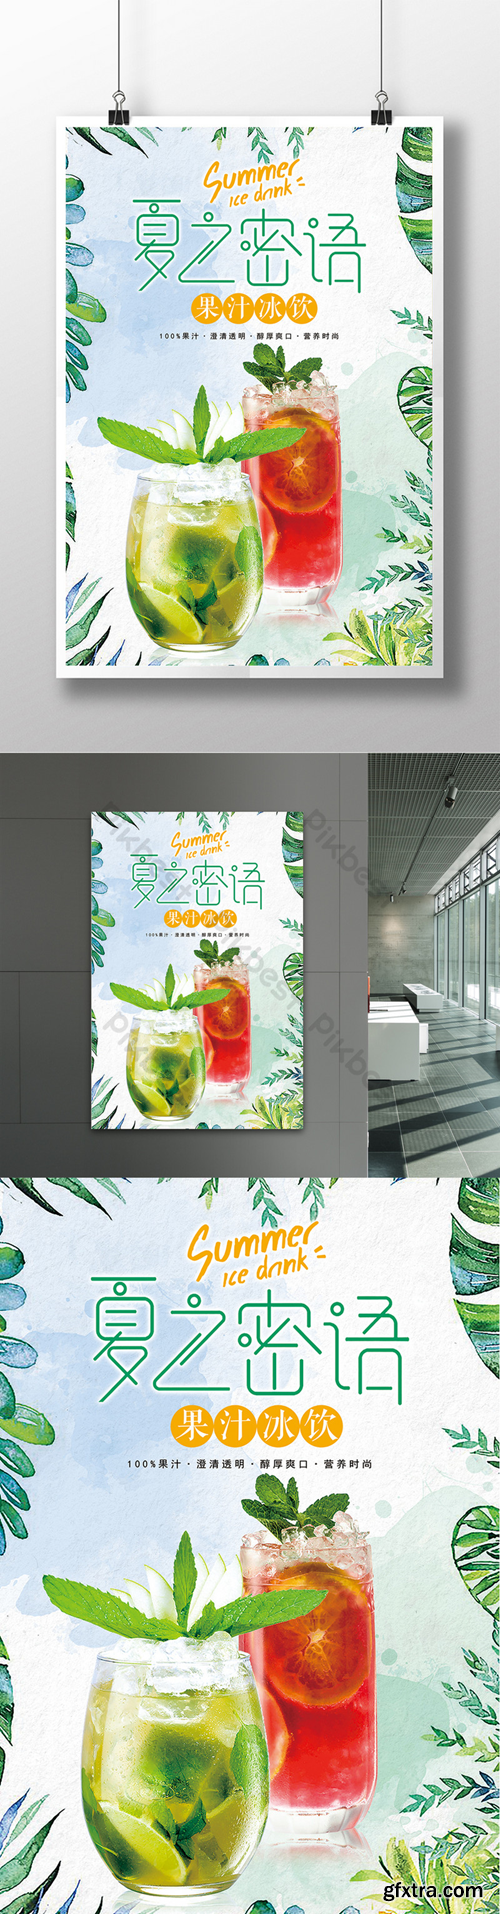 Small fresh juice ice drink poster Template PSD